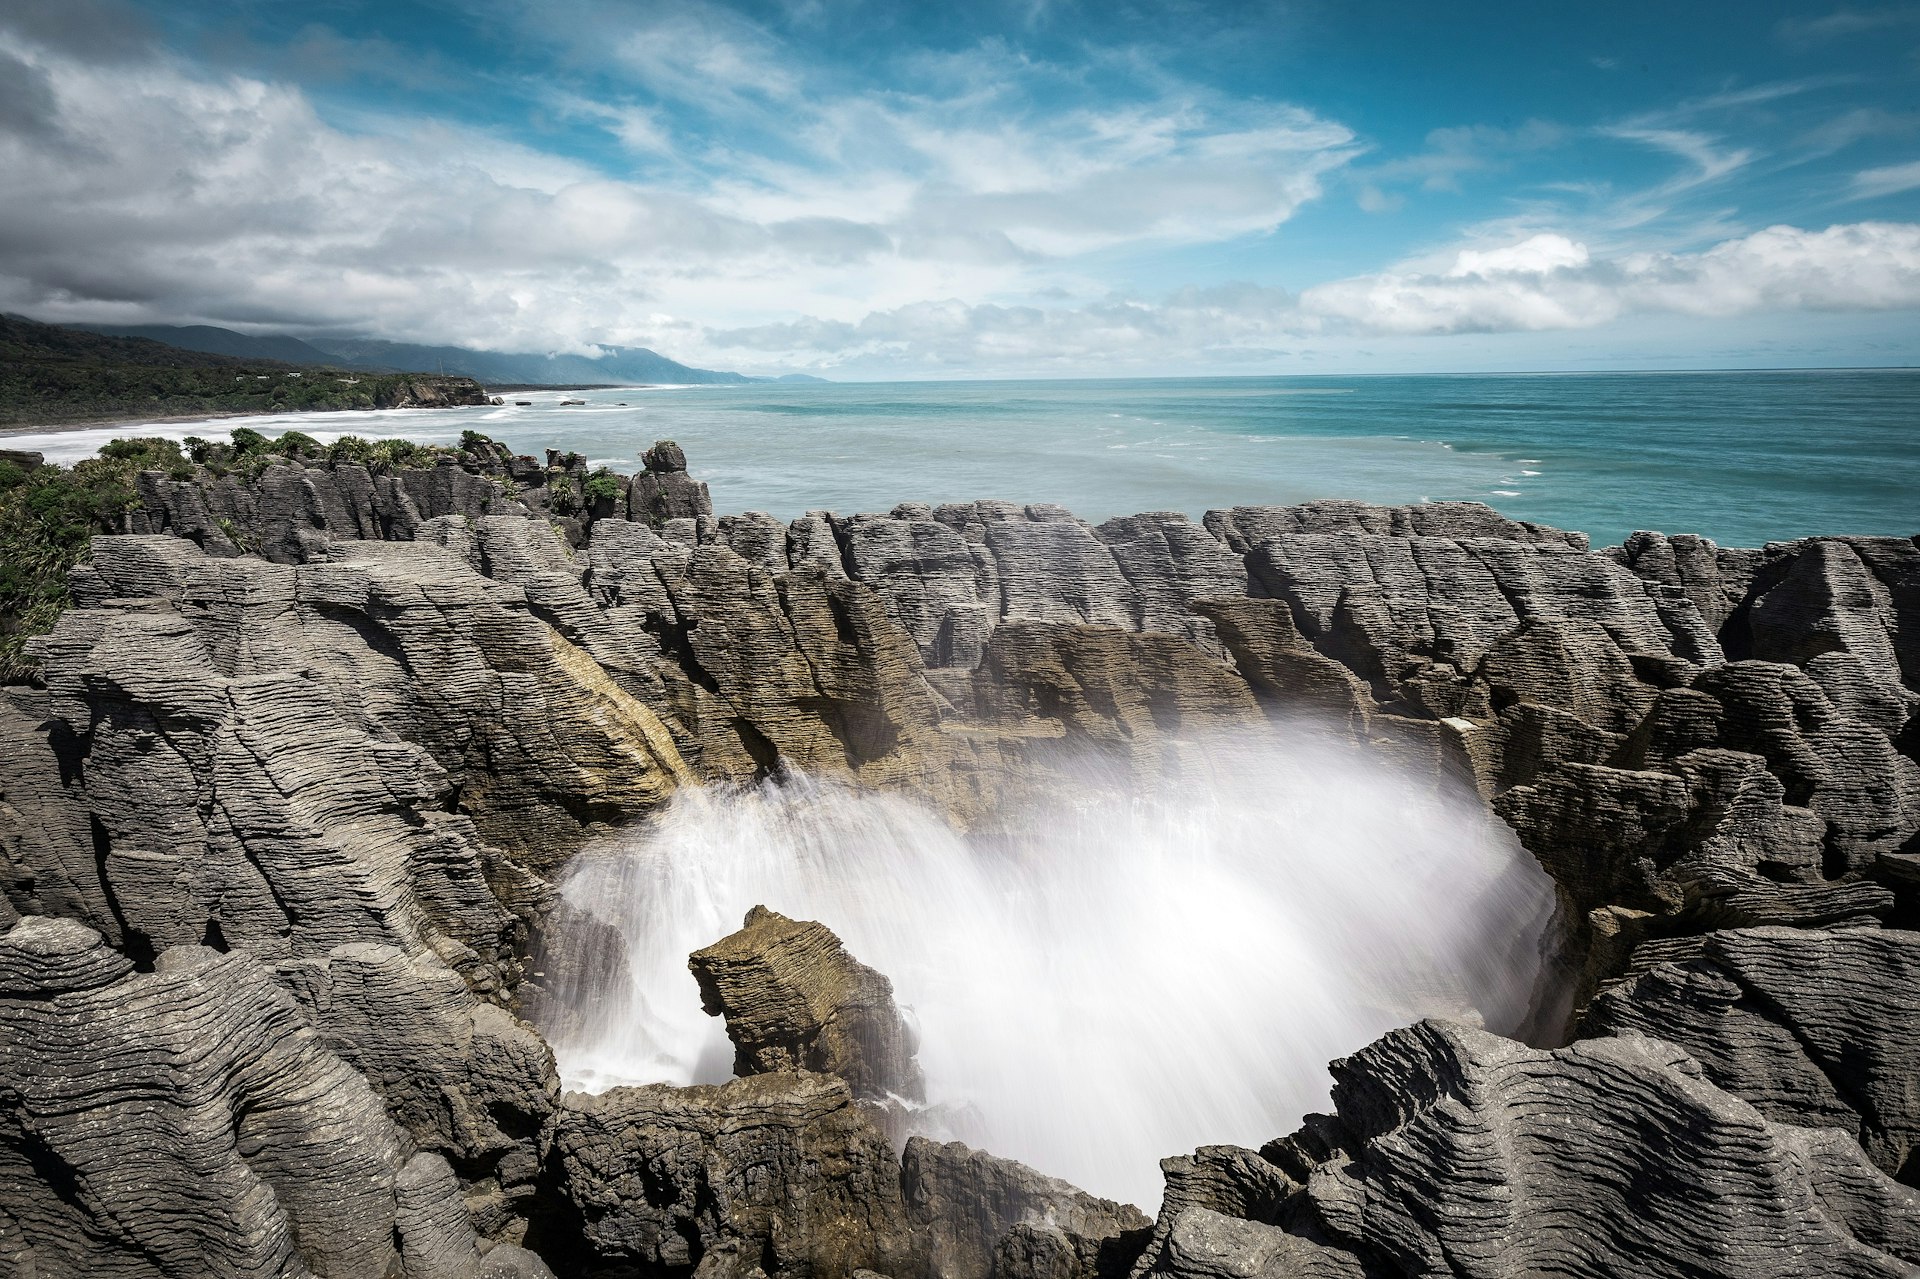 Formations of grey rock, seemingly made of thin sheets of horizontal 'pancakes' rise up into the sky; in the middle of the formation is a blow hole and water is shooting up. In the back ground is the Tasman Sea.